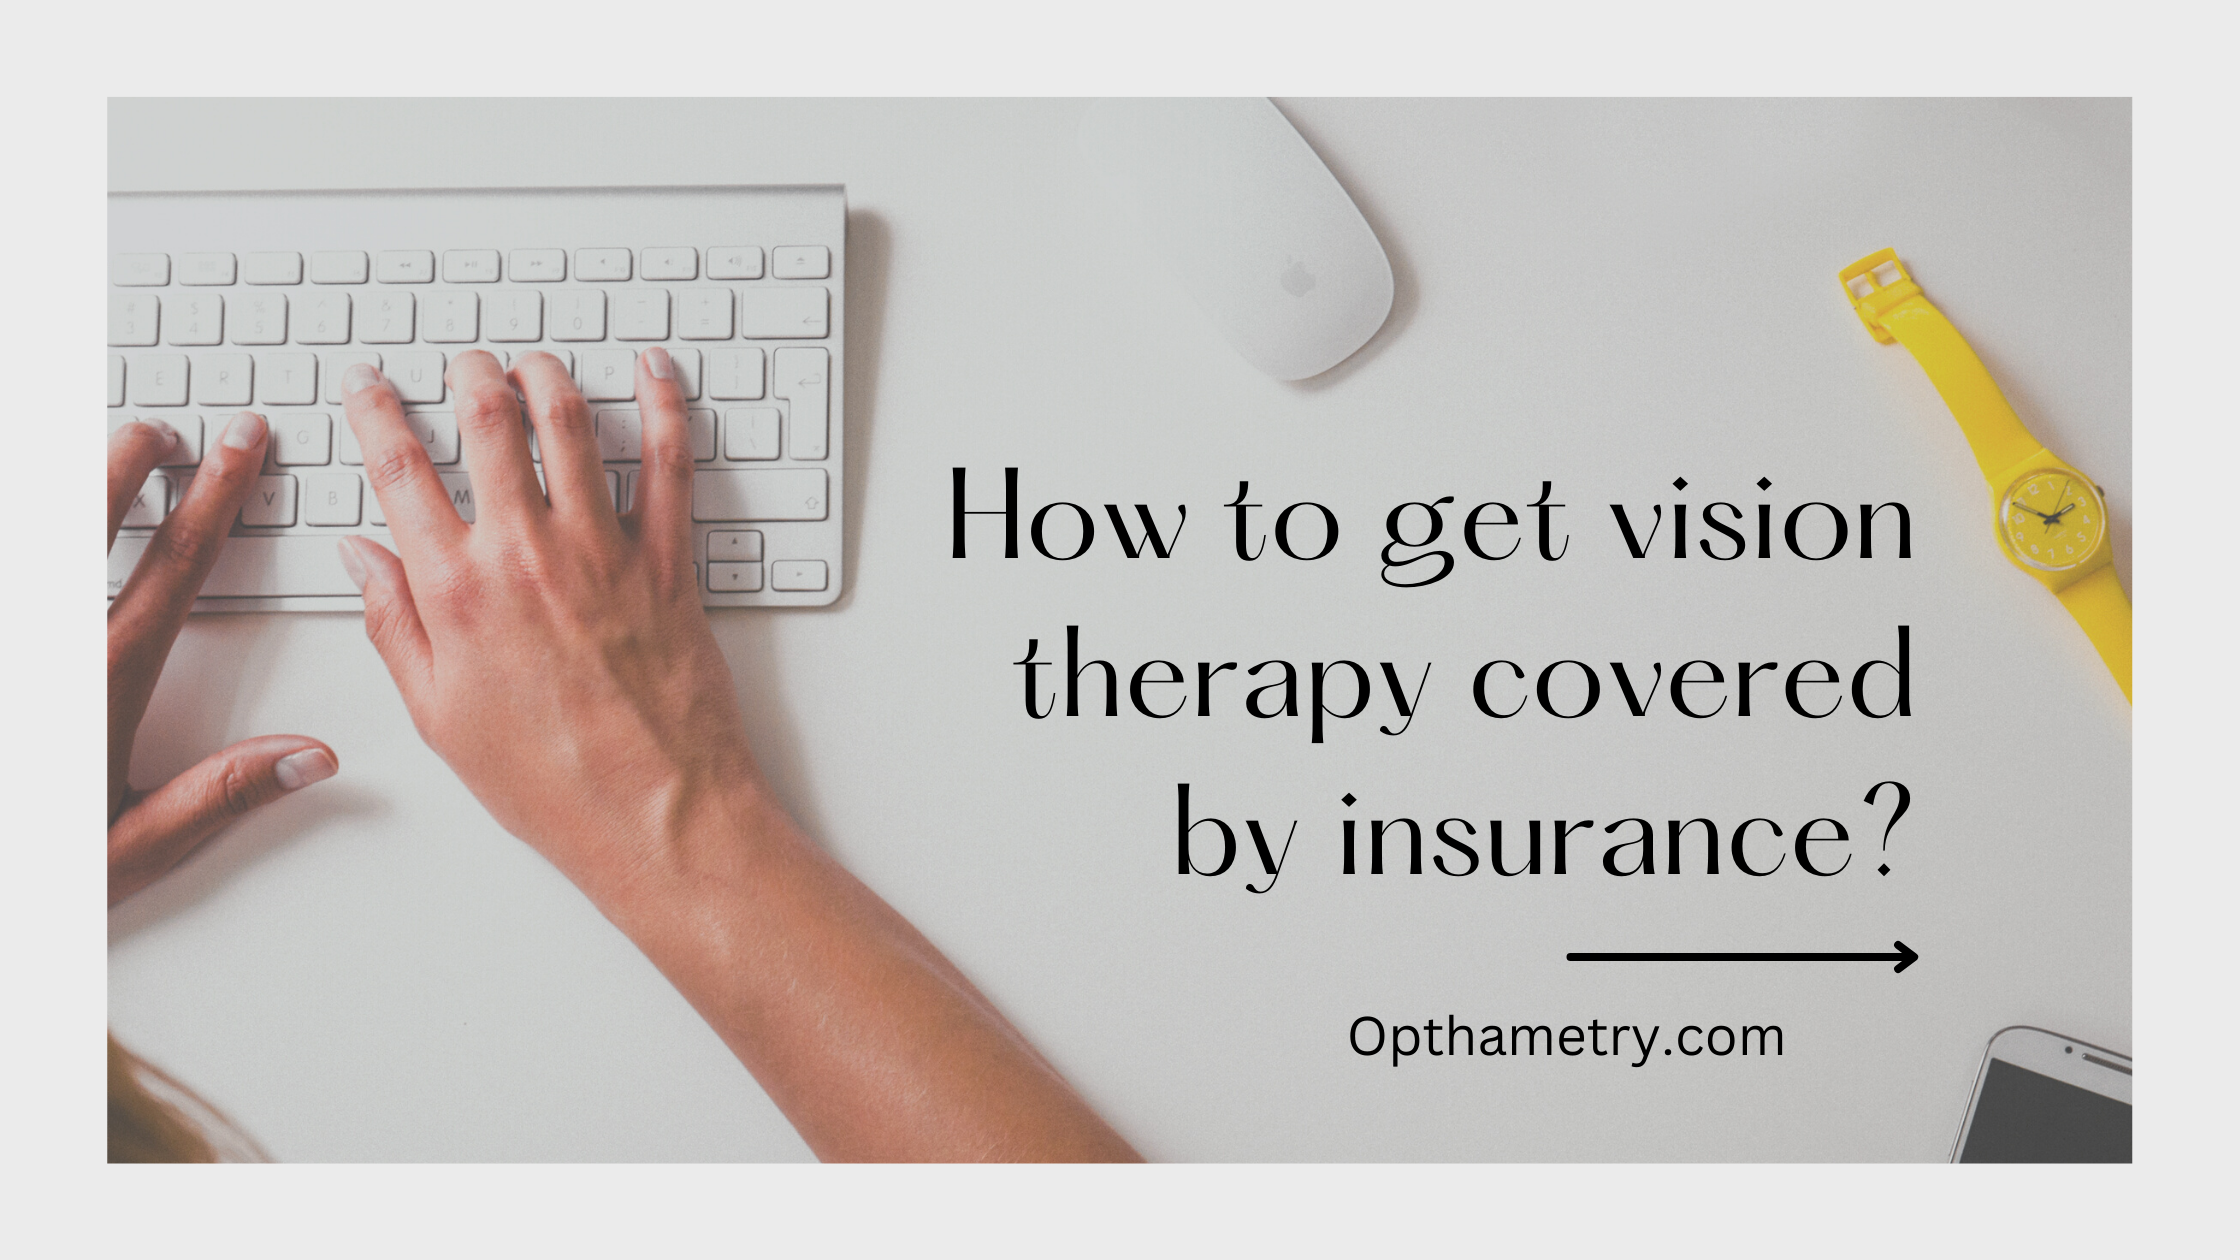 How to get vision therapy covered by insurance